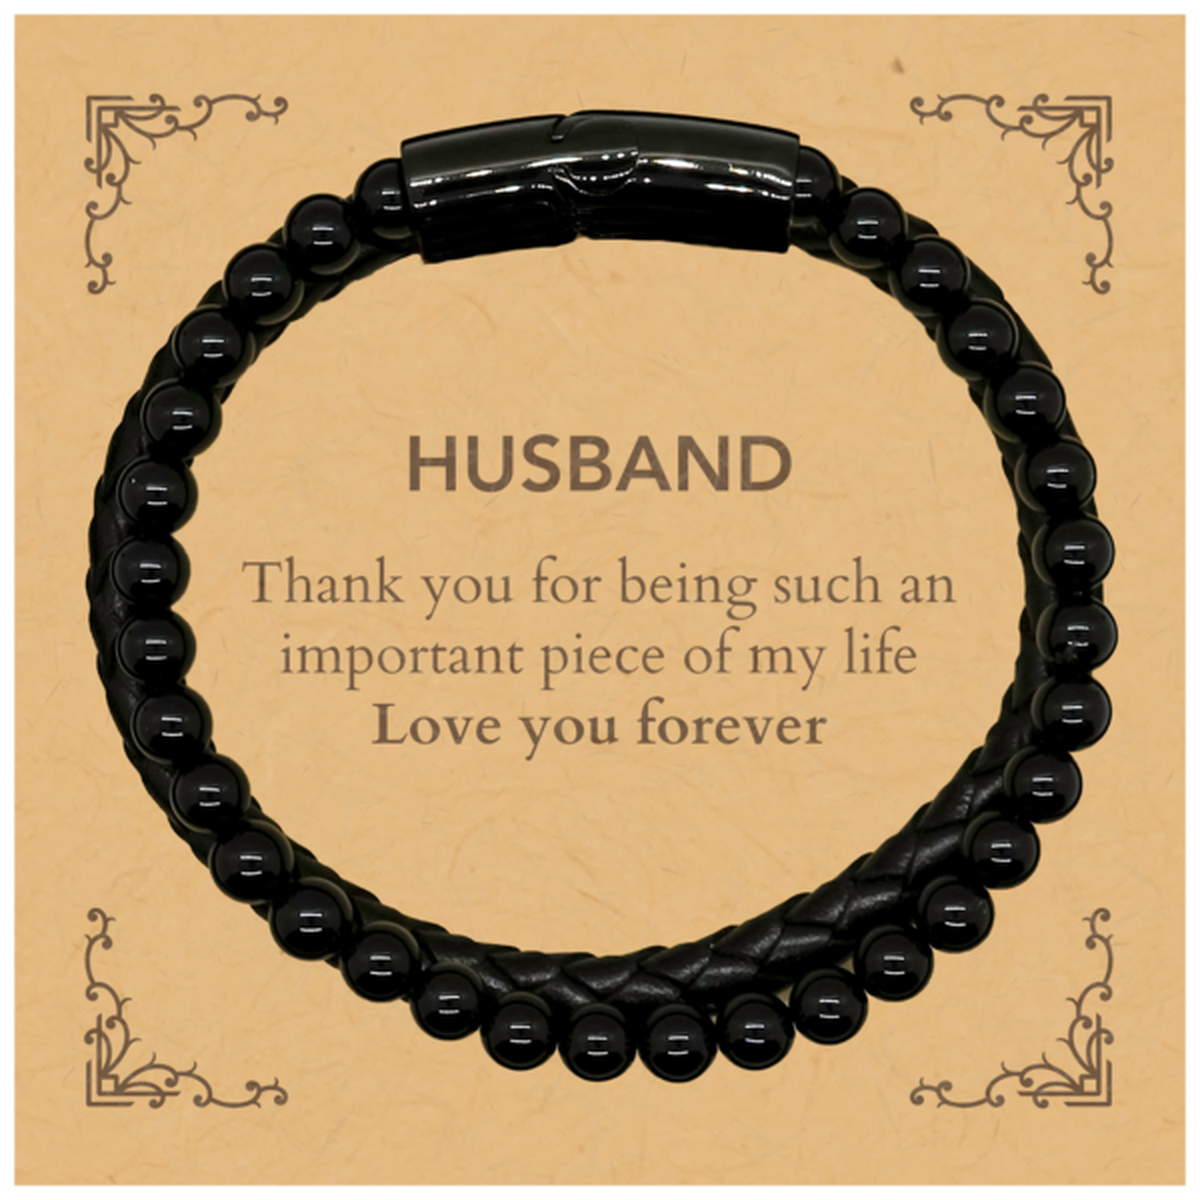 Appropriate Husband Stone Leather Bracelets Epic Birthday Gifts for Husband Thank you for being such an important piece of my life Husband Christmas Mothers Fathers Day